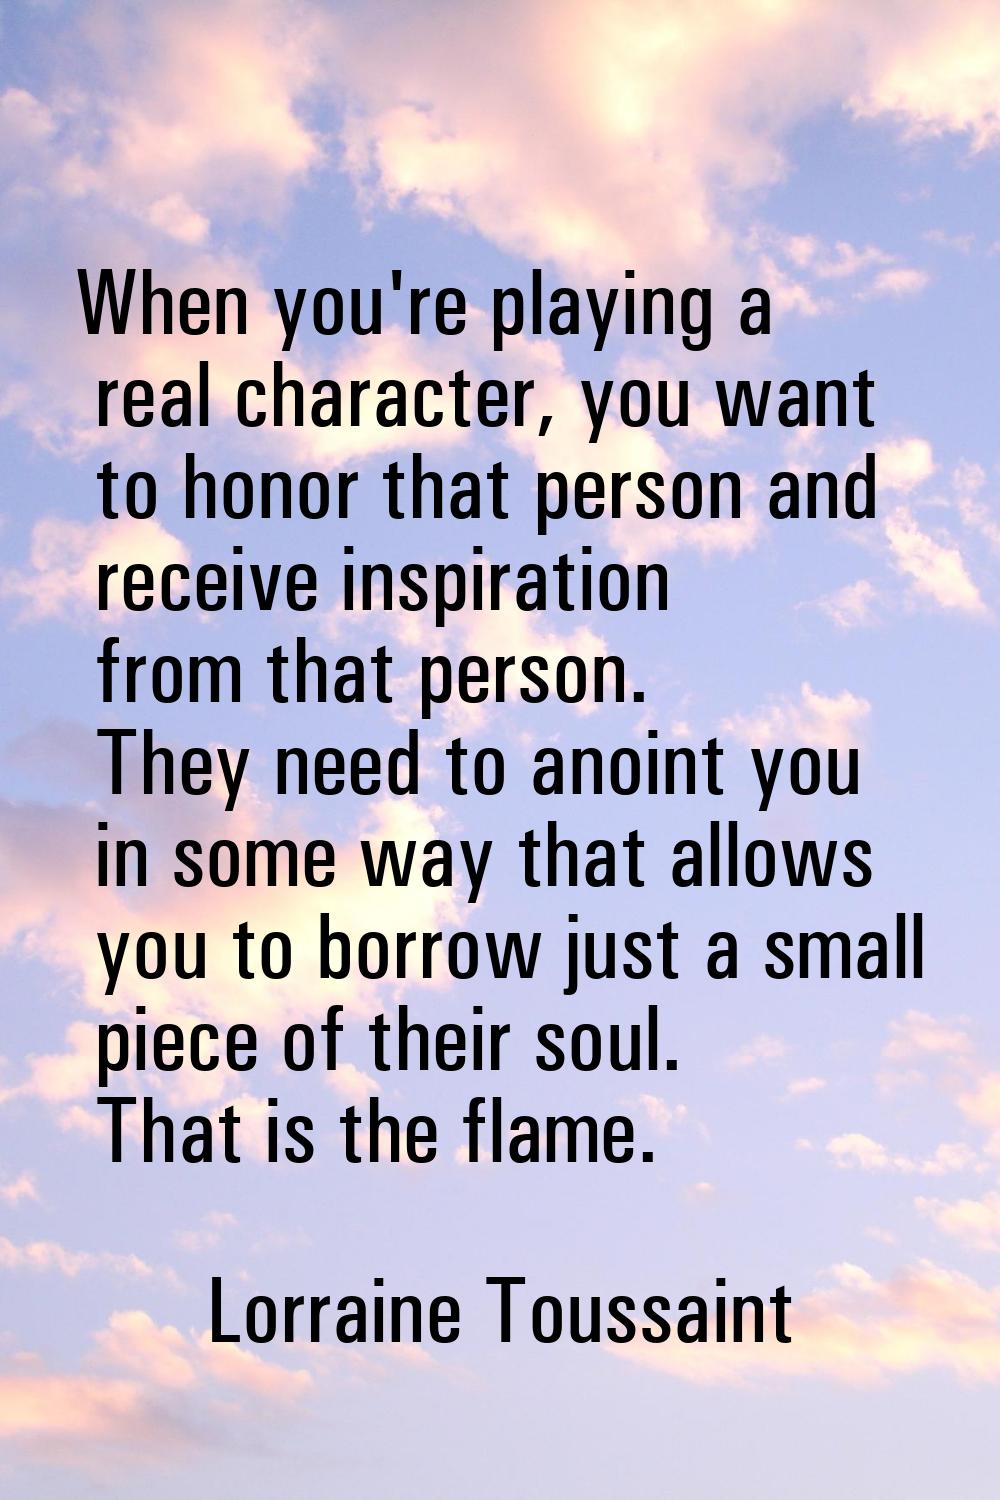 When you're playing a real character, you want to honor that person and receive inspiration from th